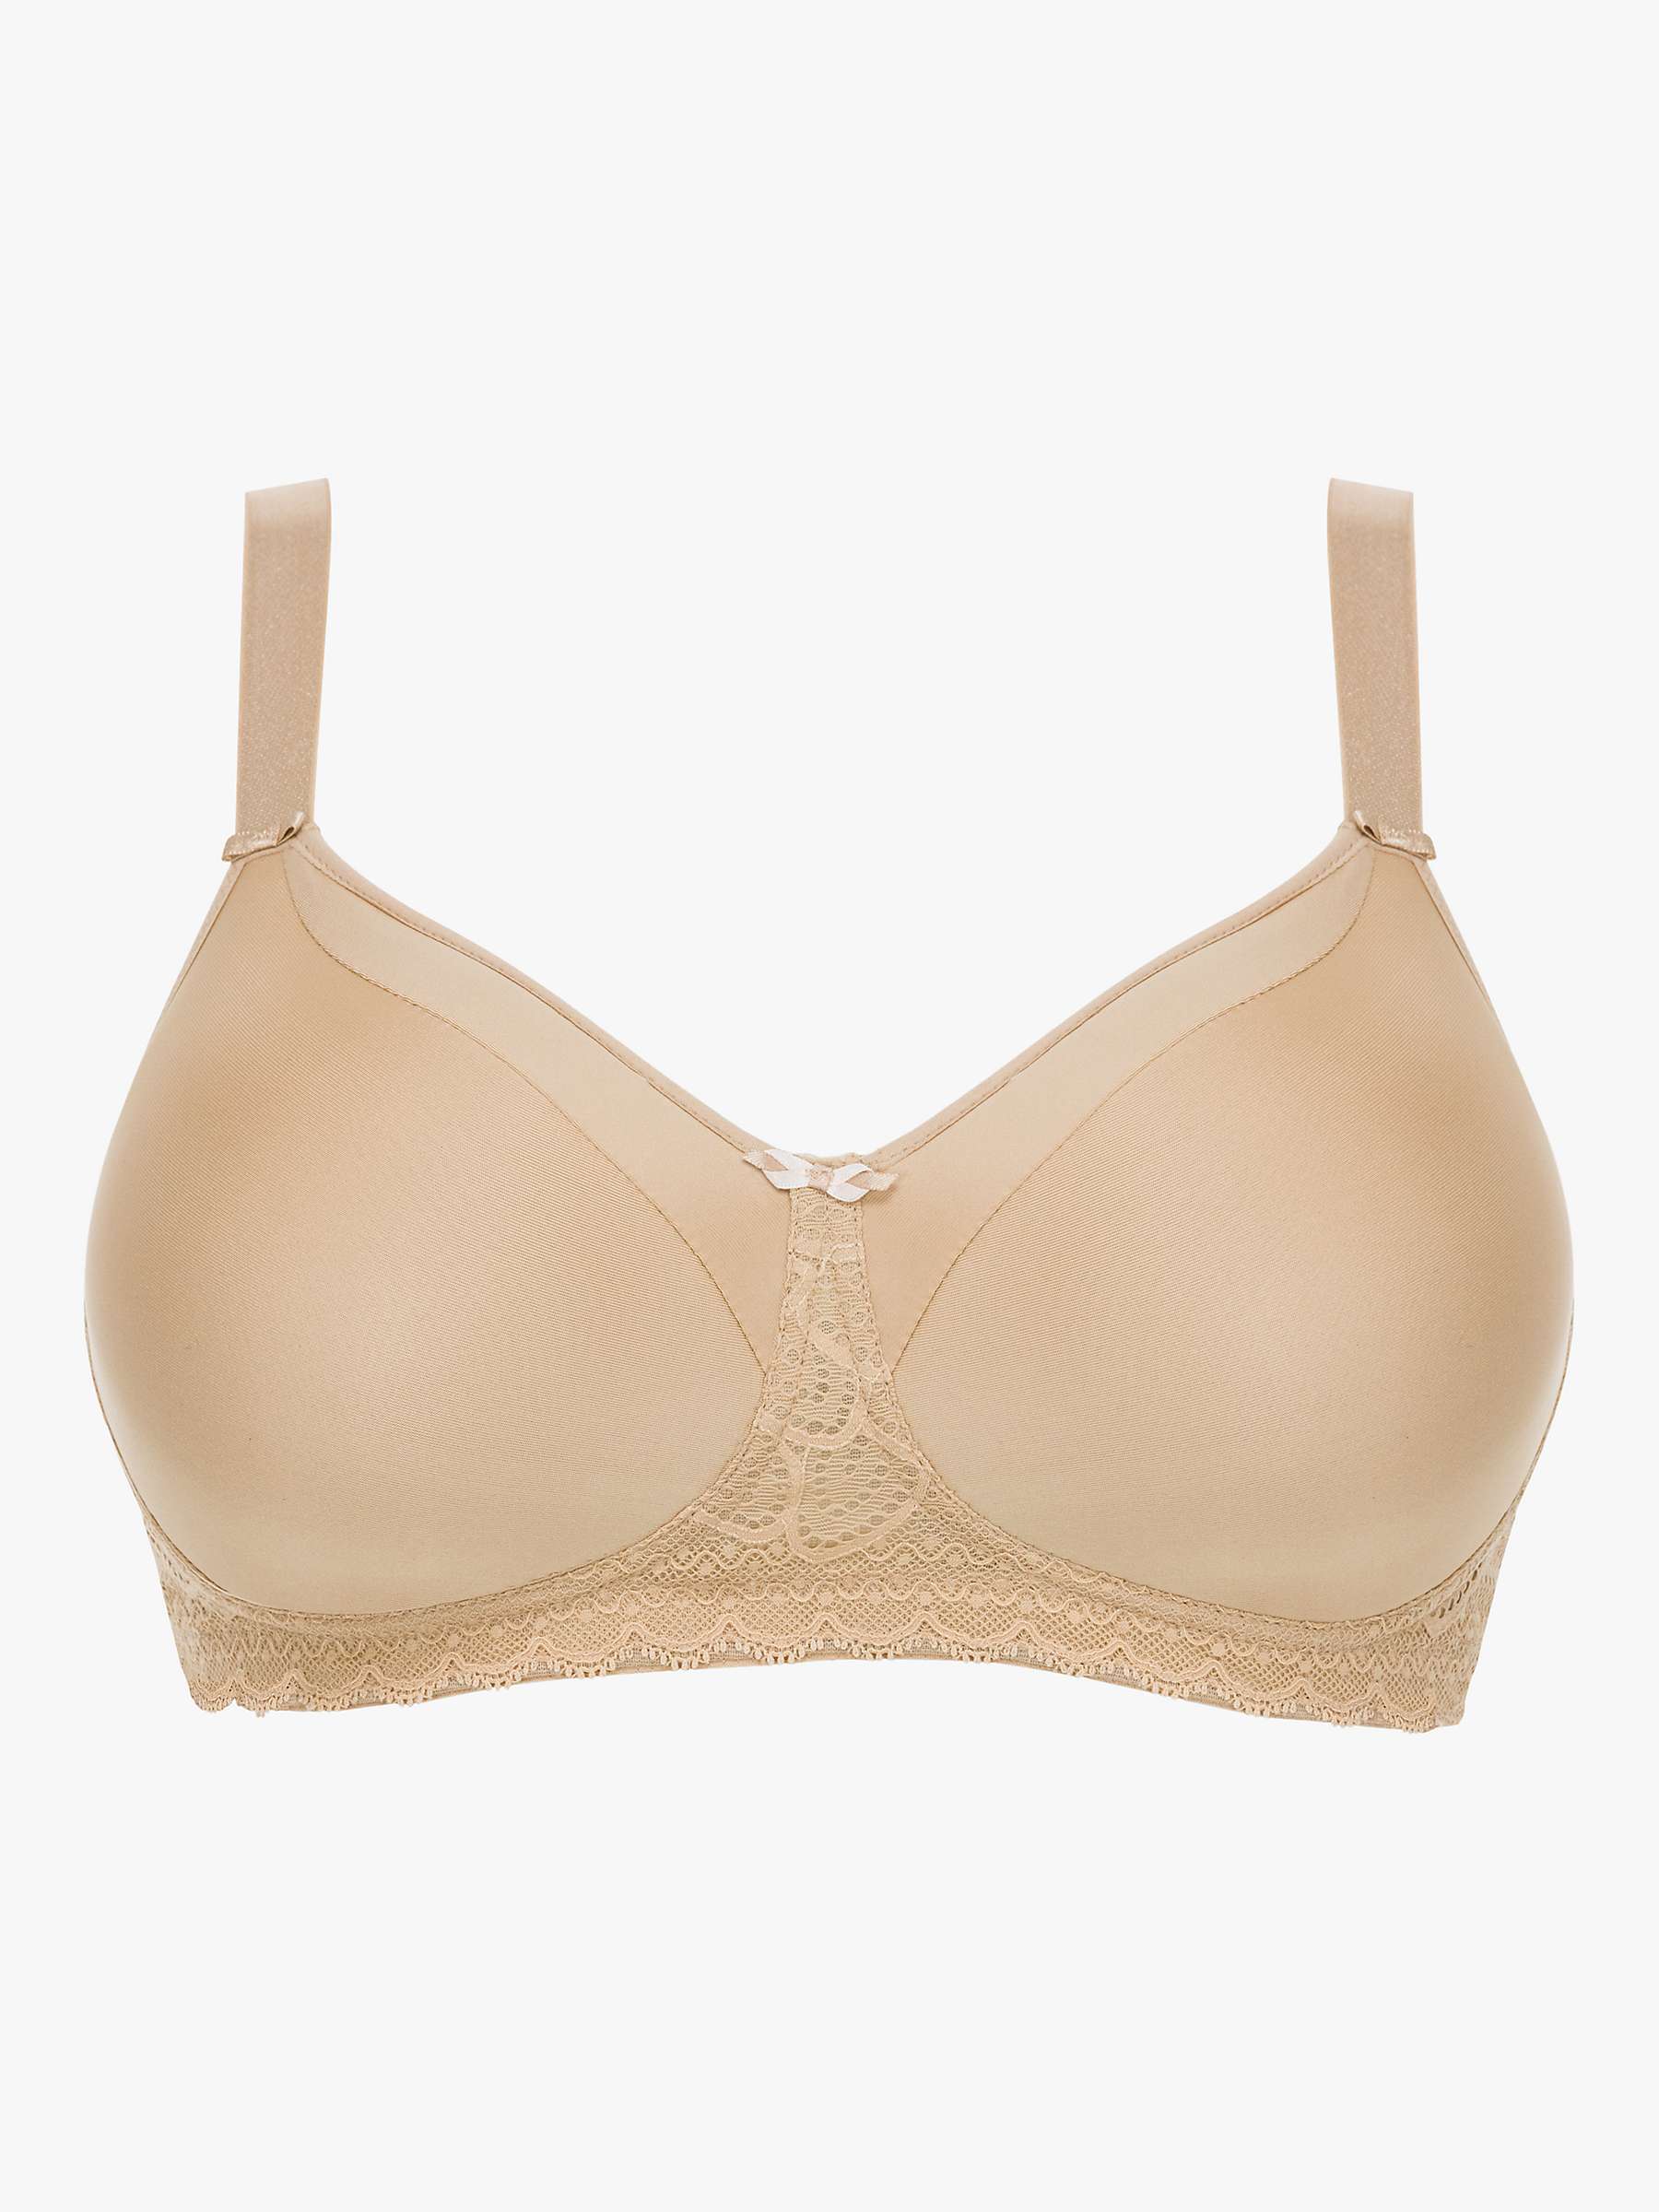 Buy Chantelle Absolute Comfort Memory Foam Non Wired Bra Online at johnlewis.com